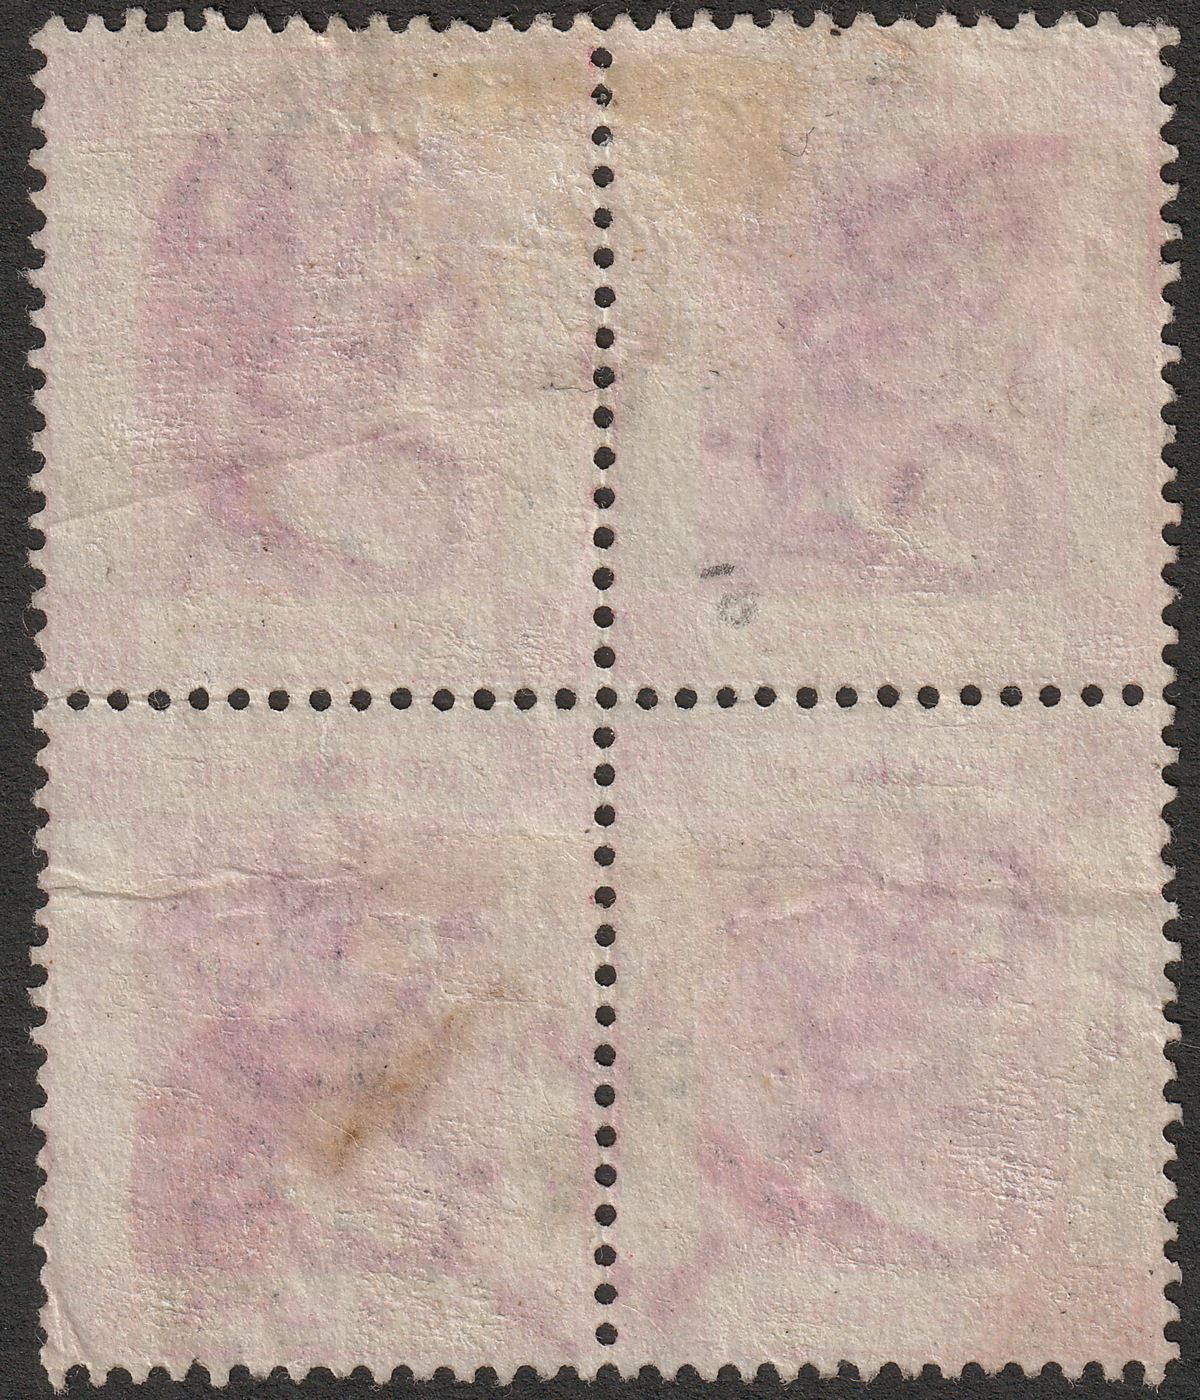 Hong Kong 1900 QV 2c Block of 4 Used with HK Postmarks + Amoy IPO Marks x2